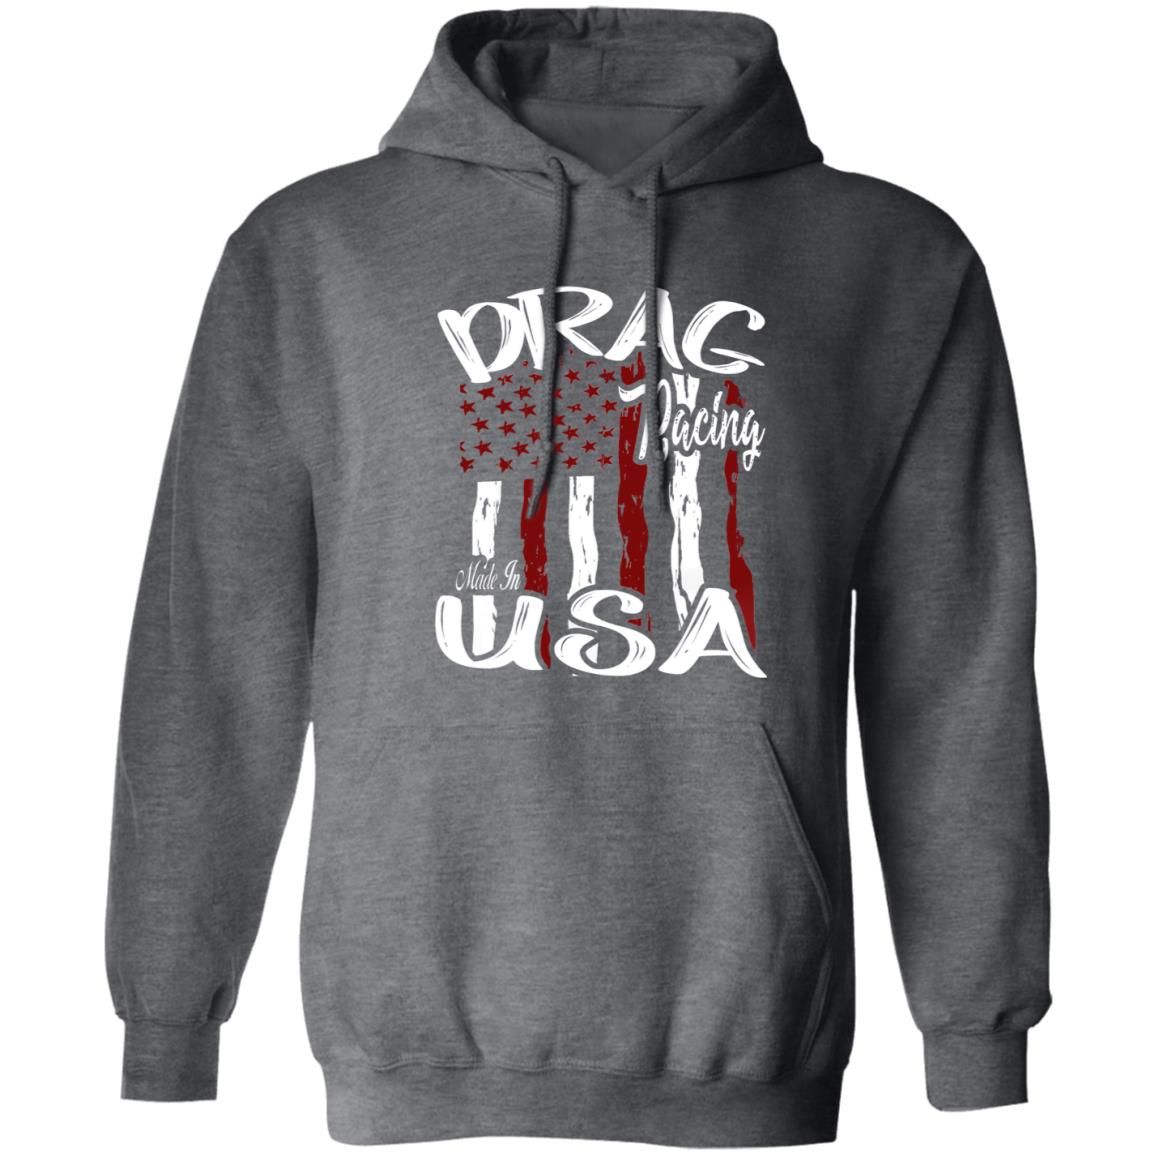 Drag Racing Made In USA Pullover Hoodie 8 oz (Closeout)